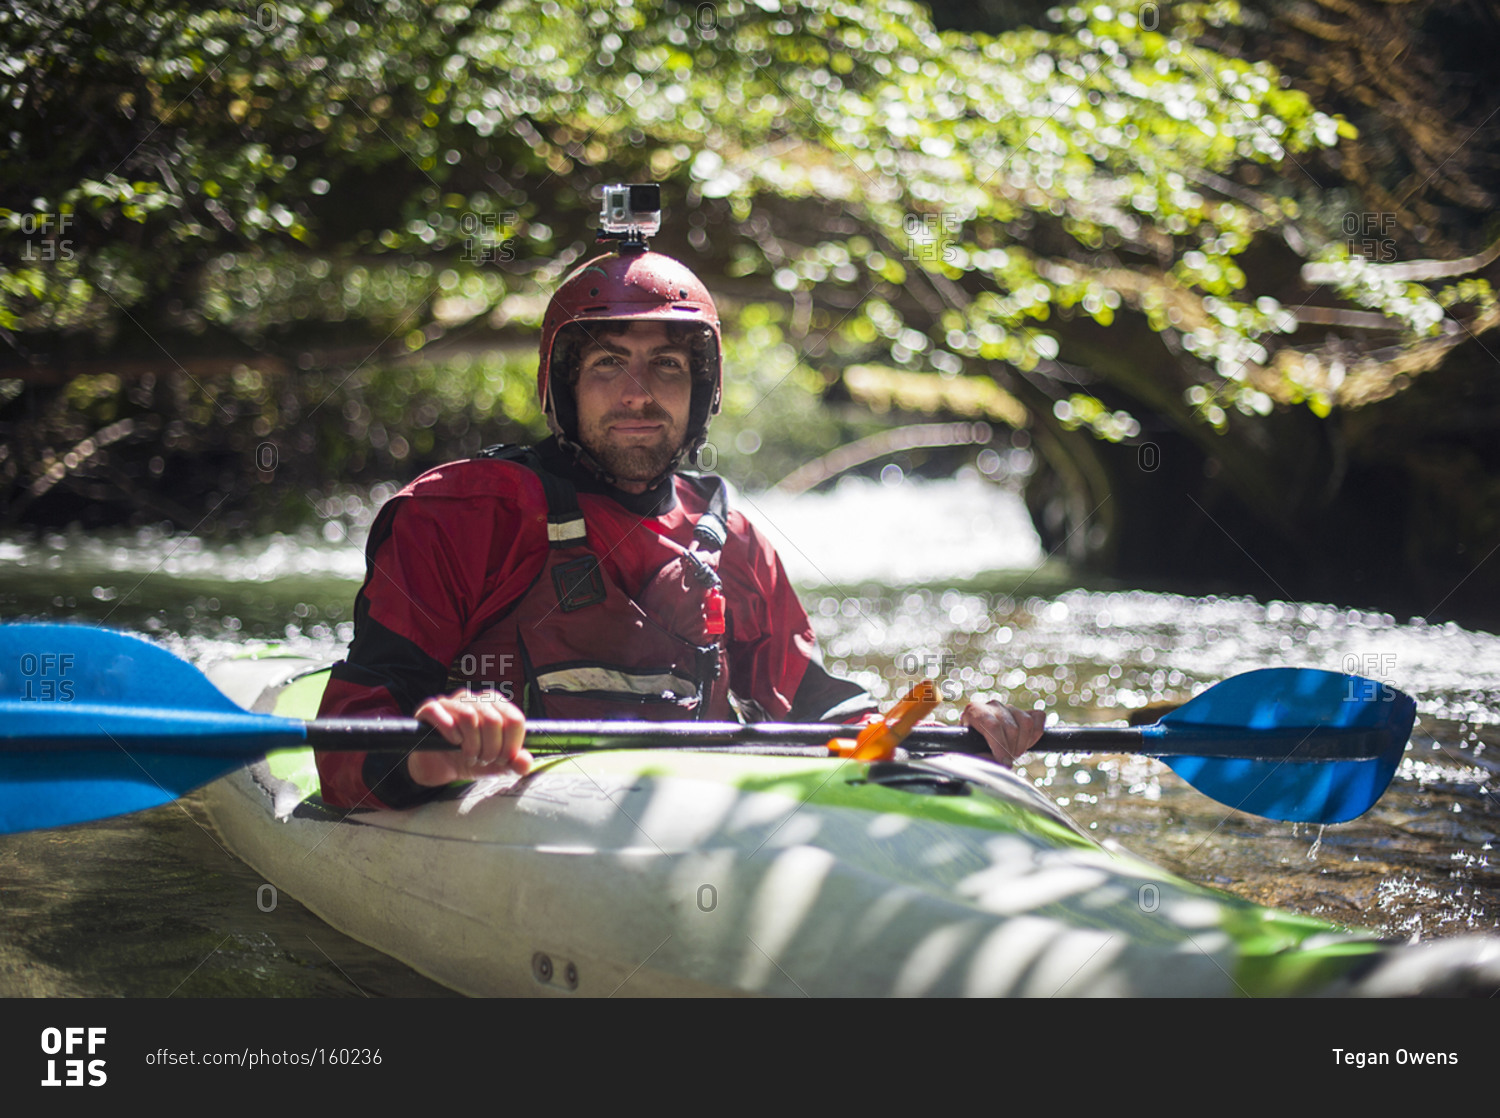 Man in kayak with camera attached on helmet